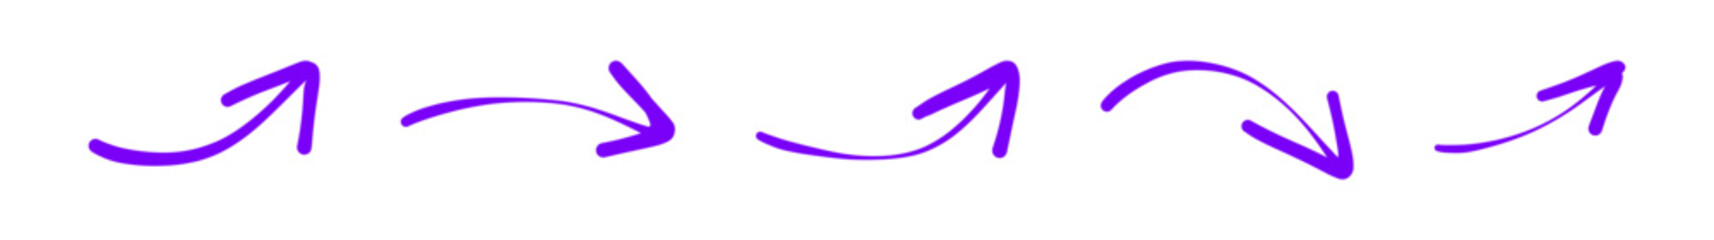 Doodle purple scribble arrows. Highlight point icons. (Full Vector)